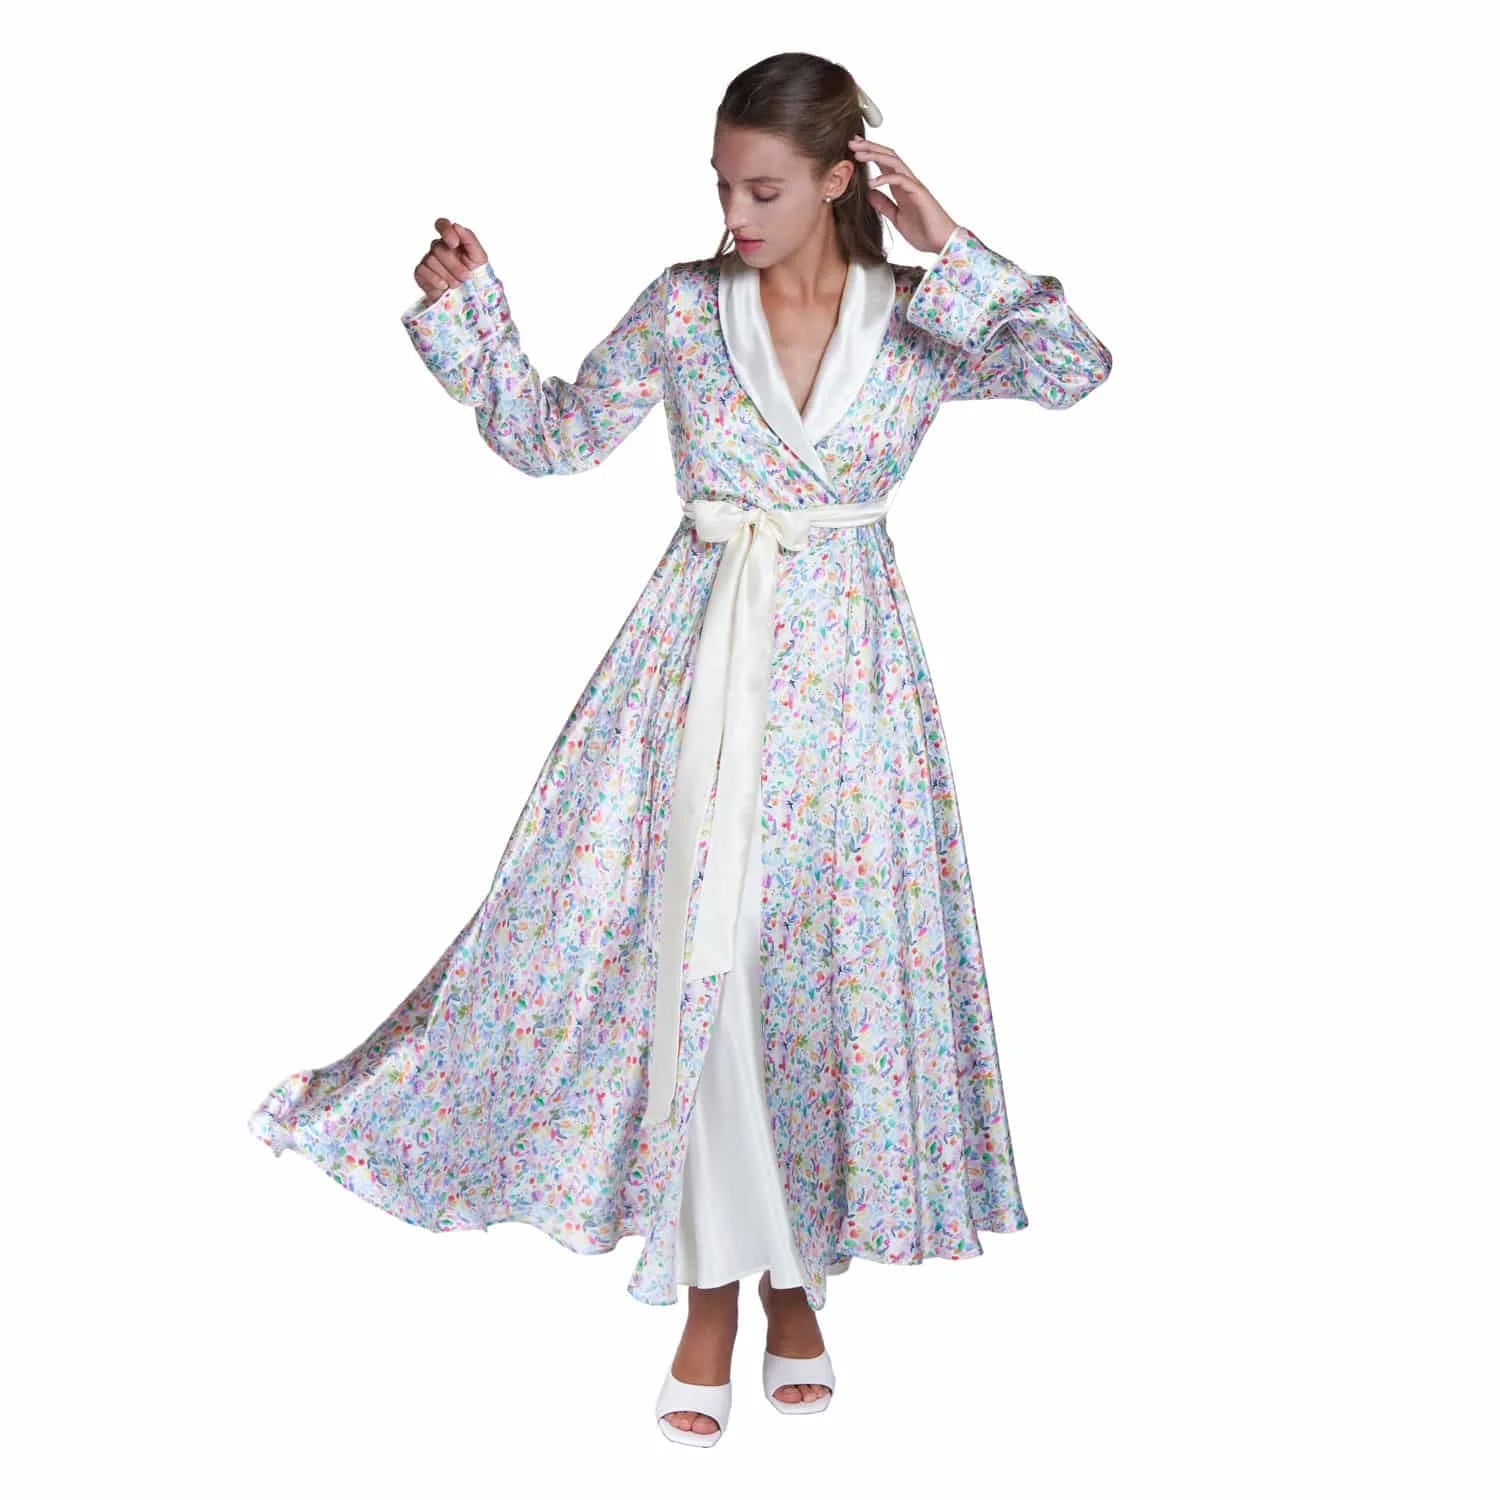 Silk robe with watercolor motif - Lingerie